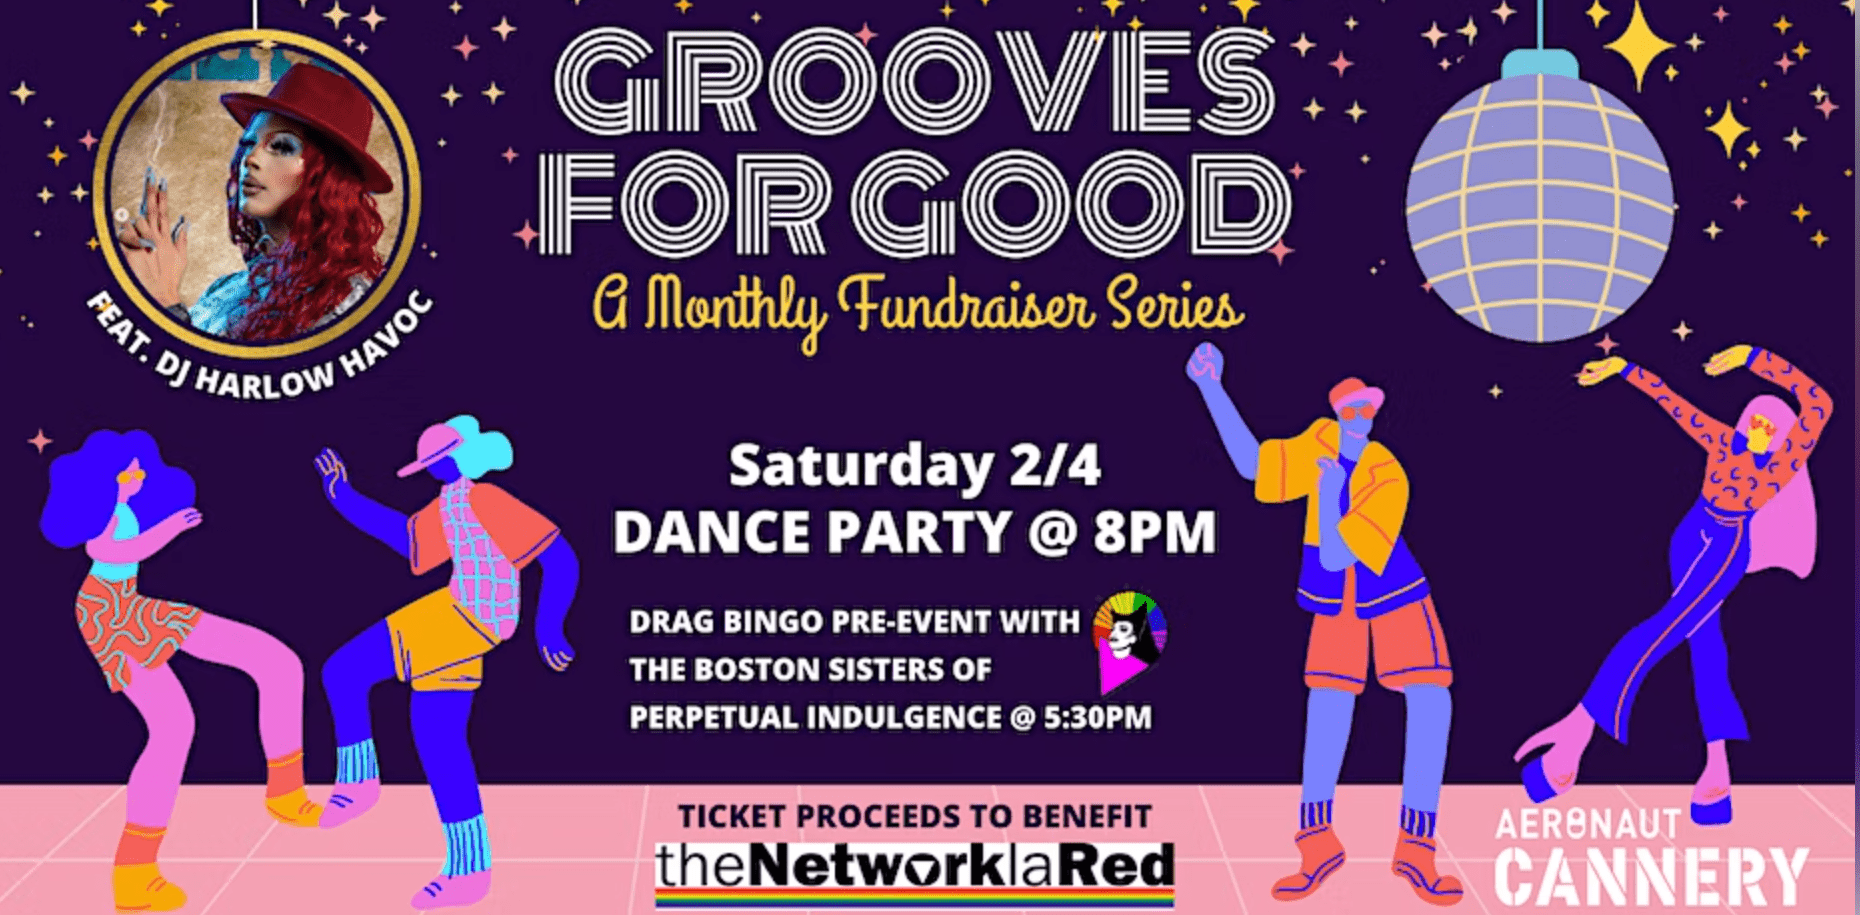 Grooves for Good ft. The Network la Red & DJ Harlow Havoc